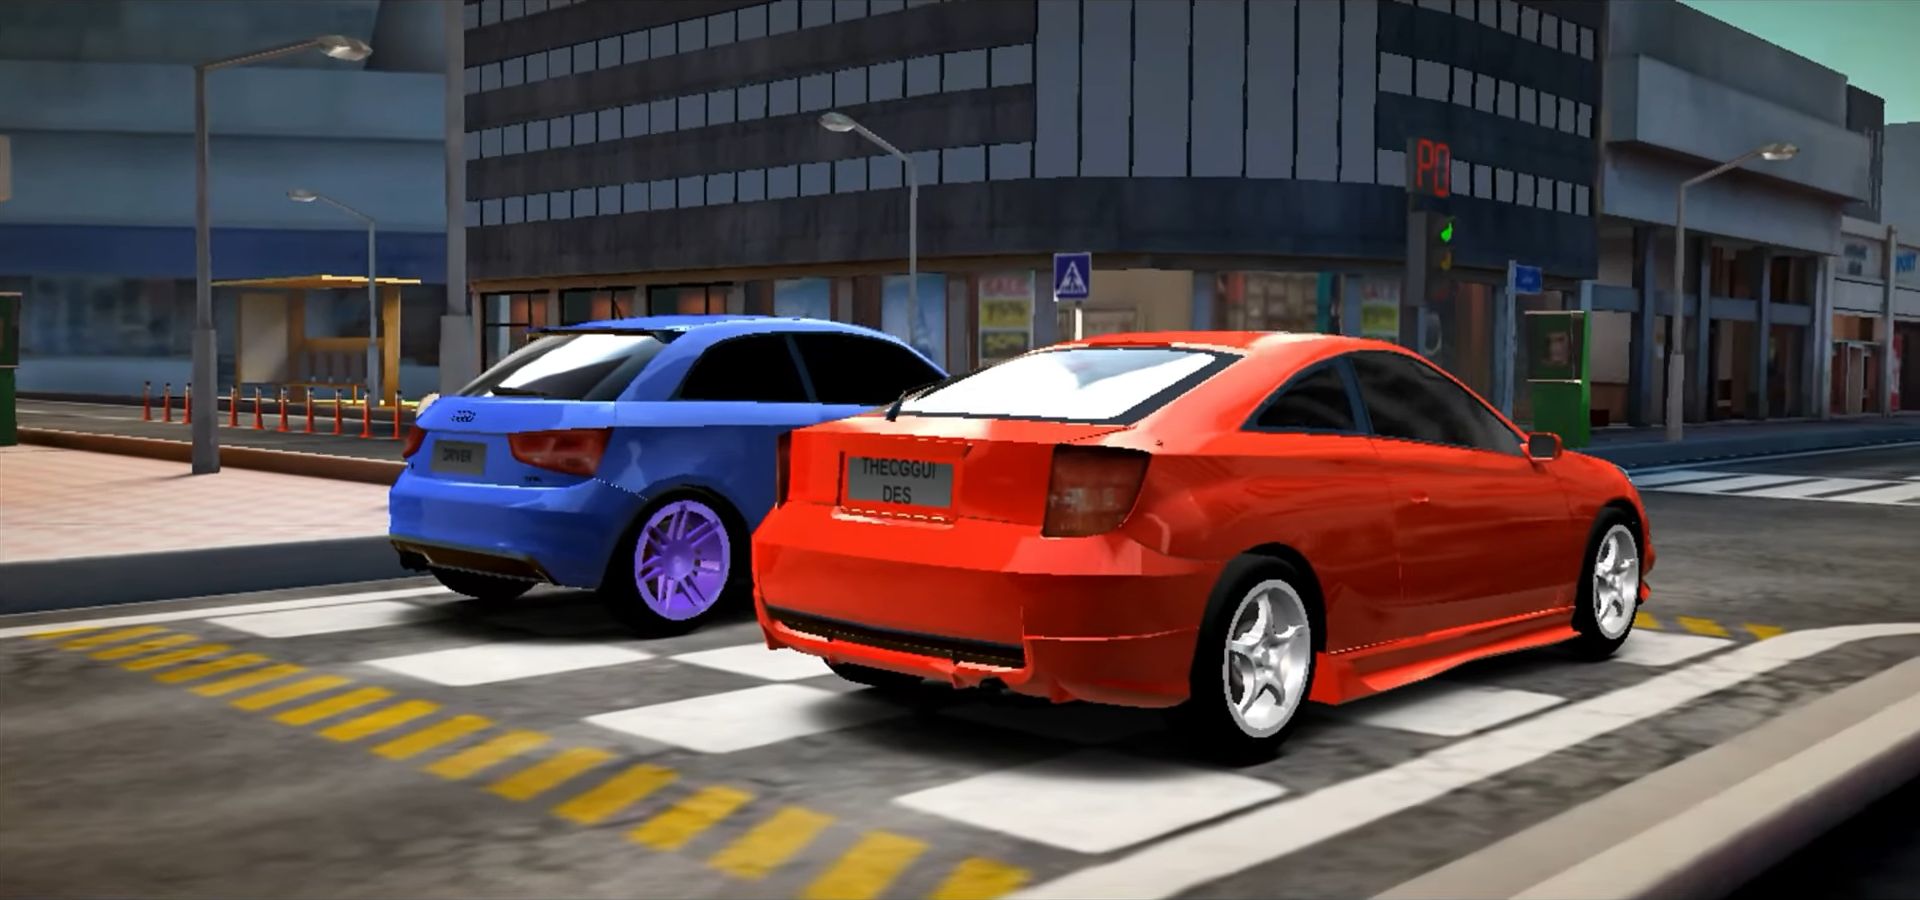 GT Club Drag Racing Car Game for Android